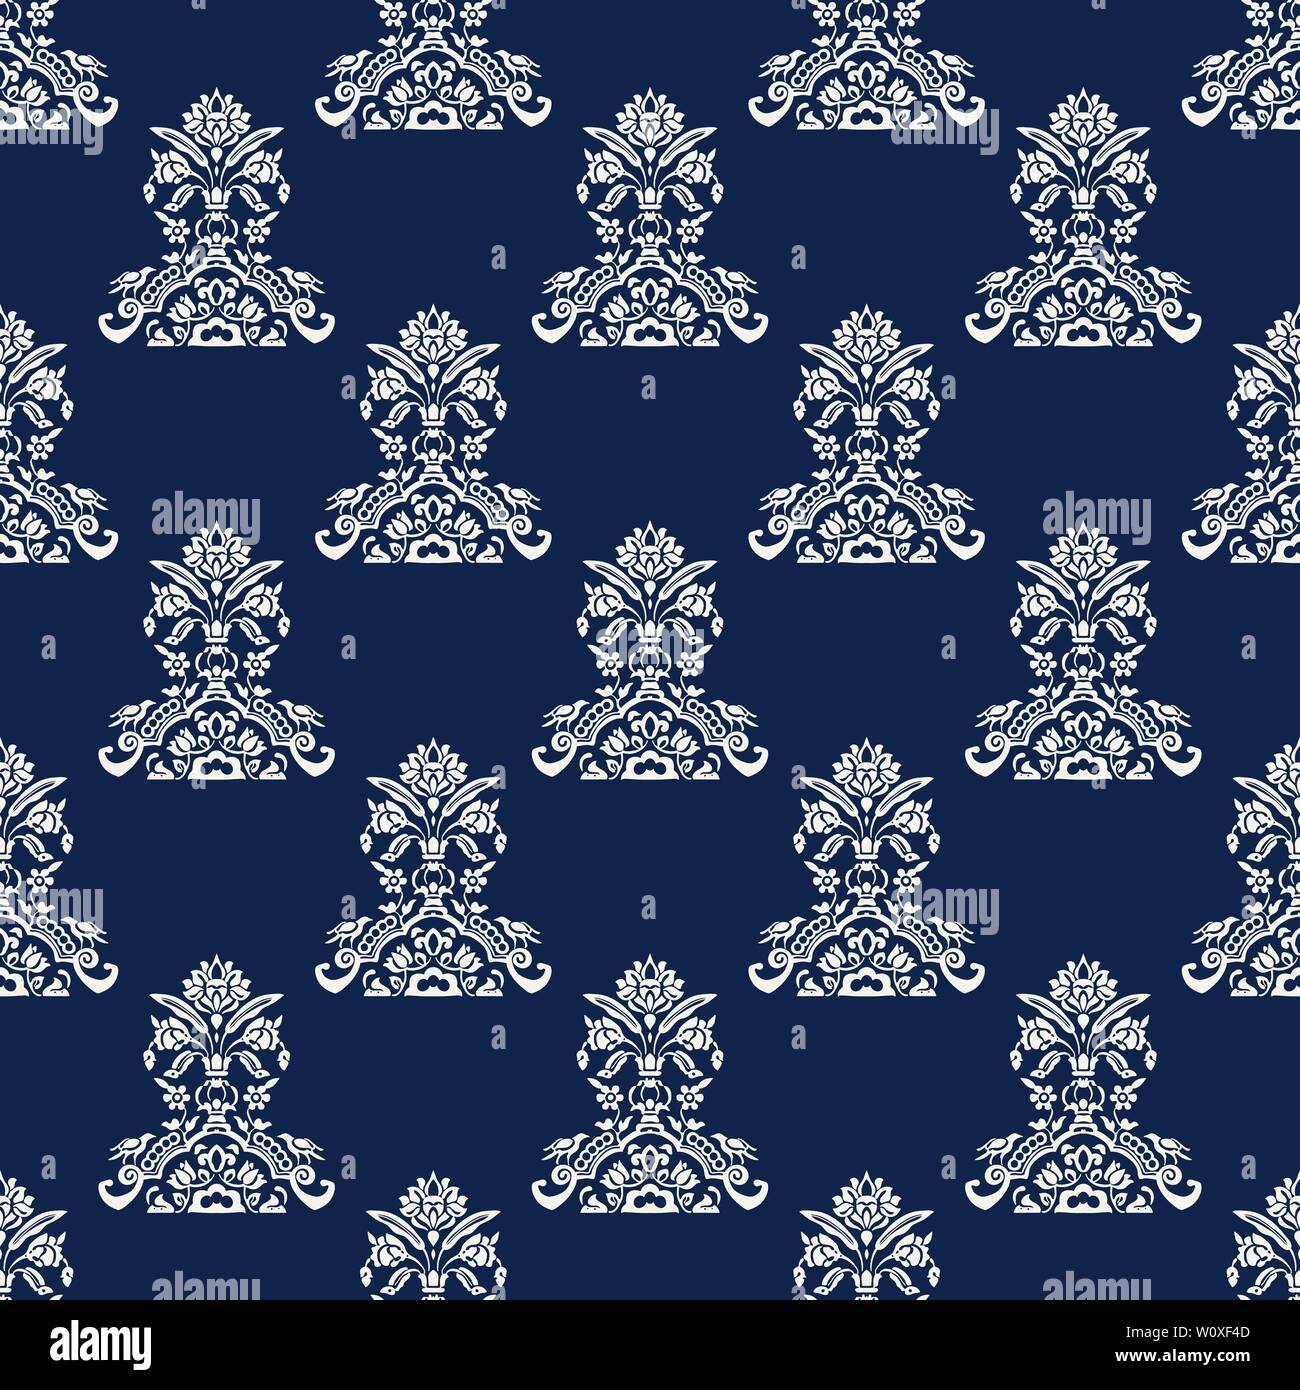 Indigo dye woodblock printed seamless ethnic floral all over pattern. Traditional oriental motif of India with flowers and birds, ecru on navy blue ba Stock Vector